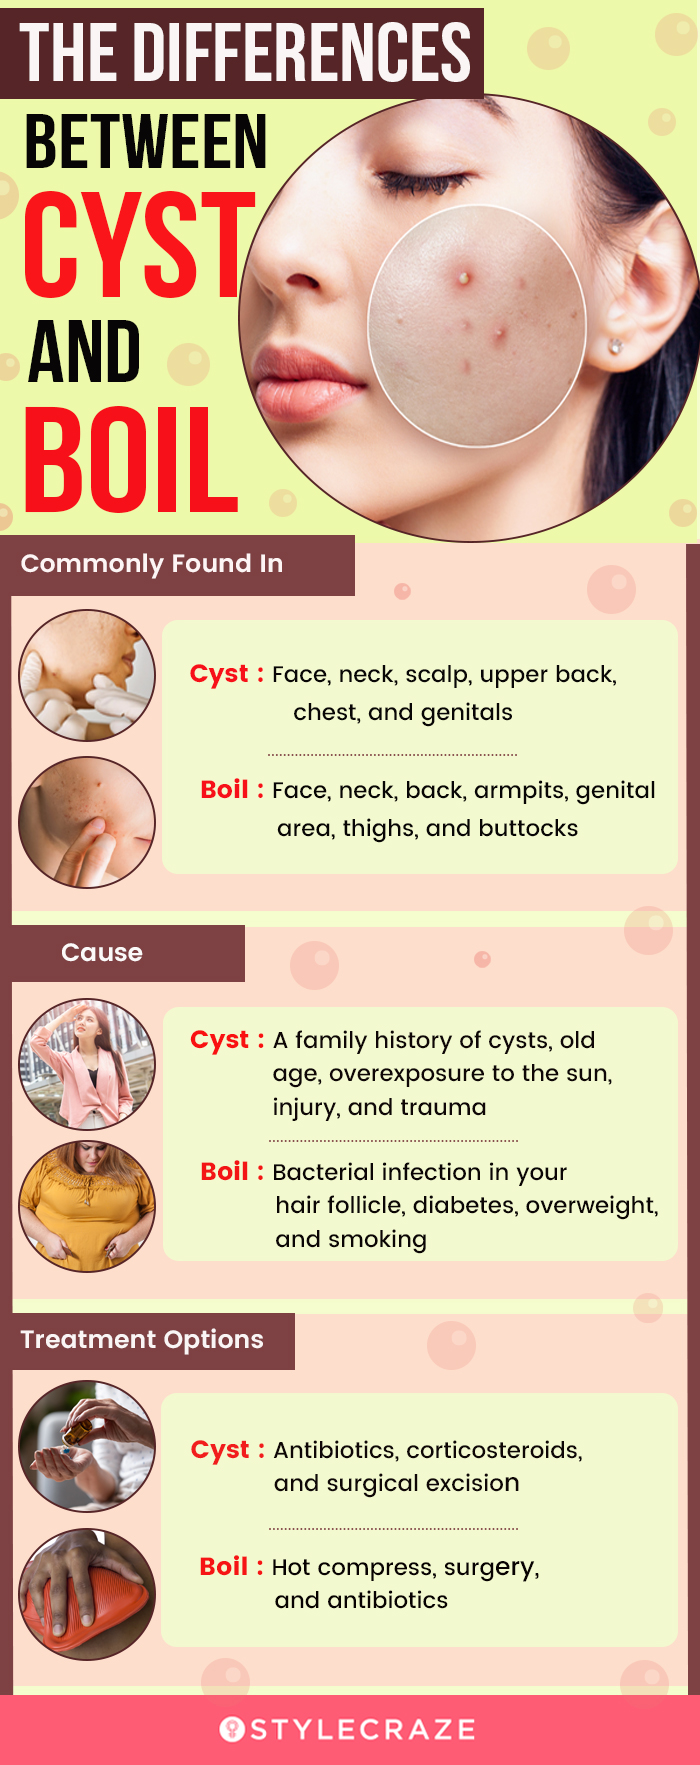 the differences between cyst and boil [infographic]